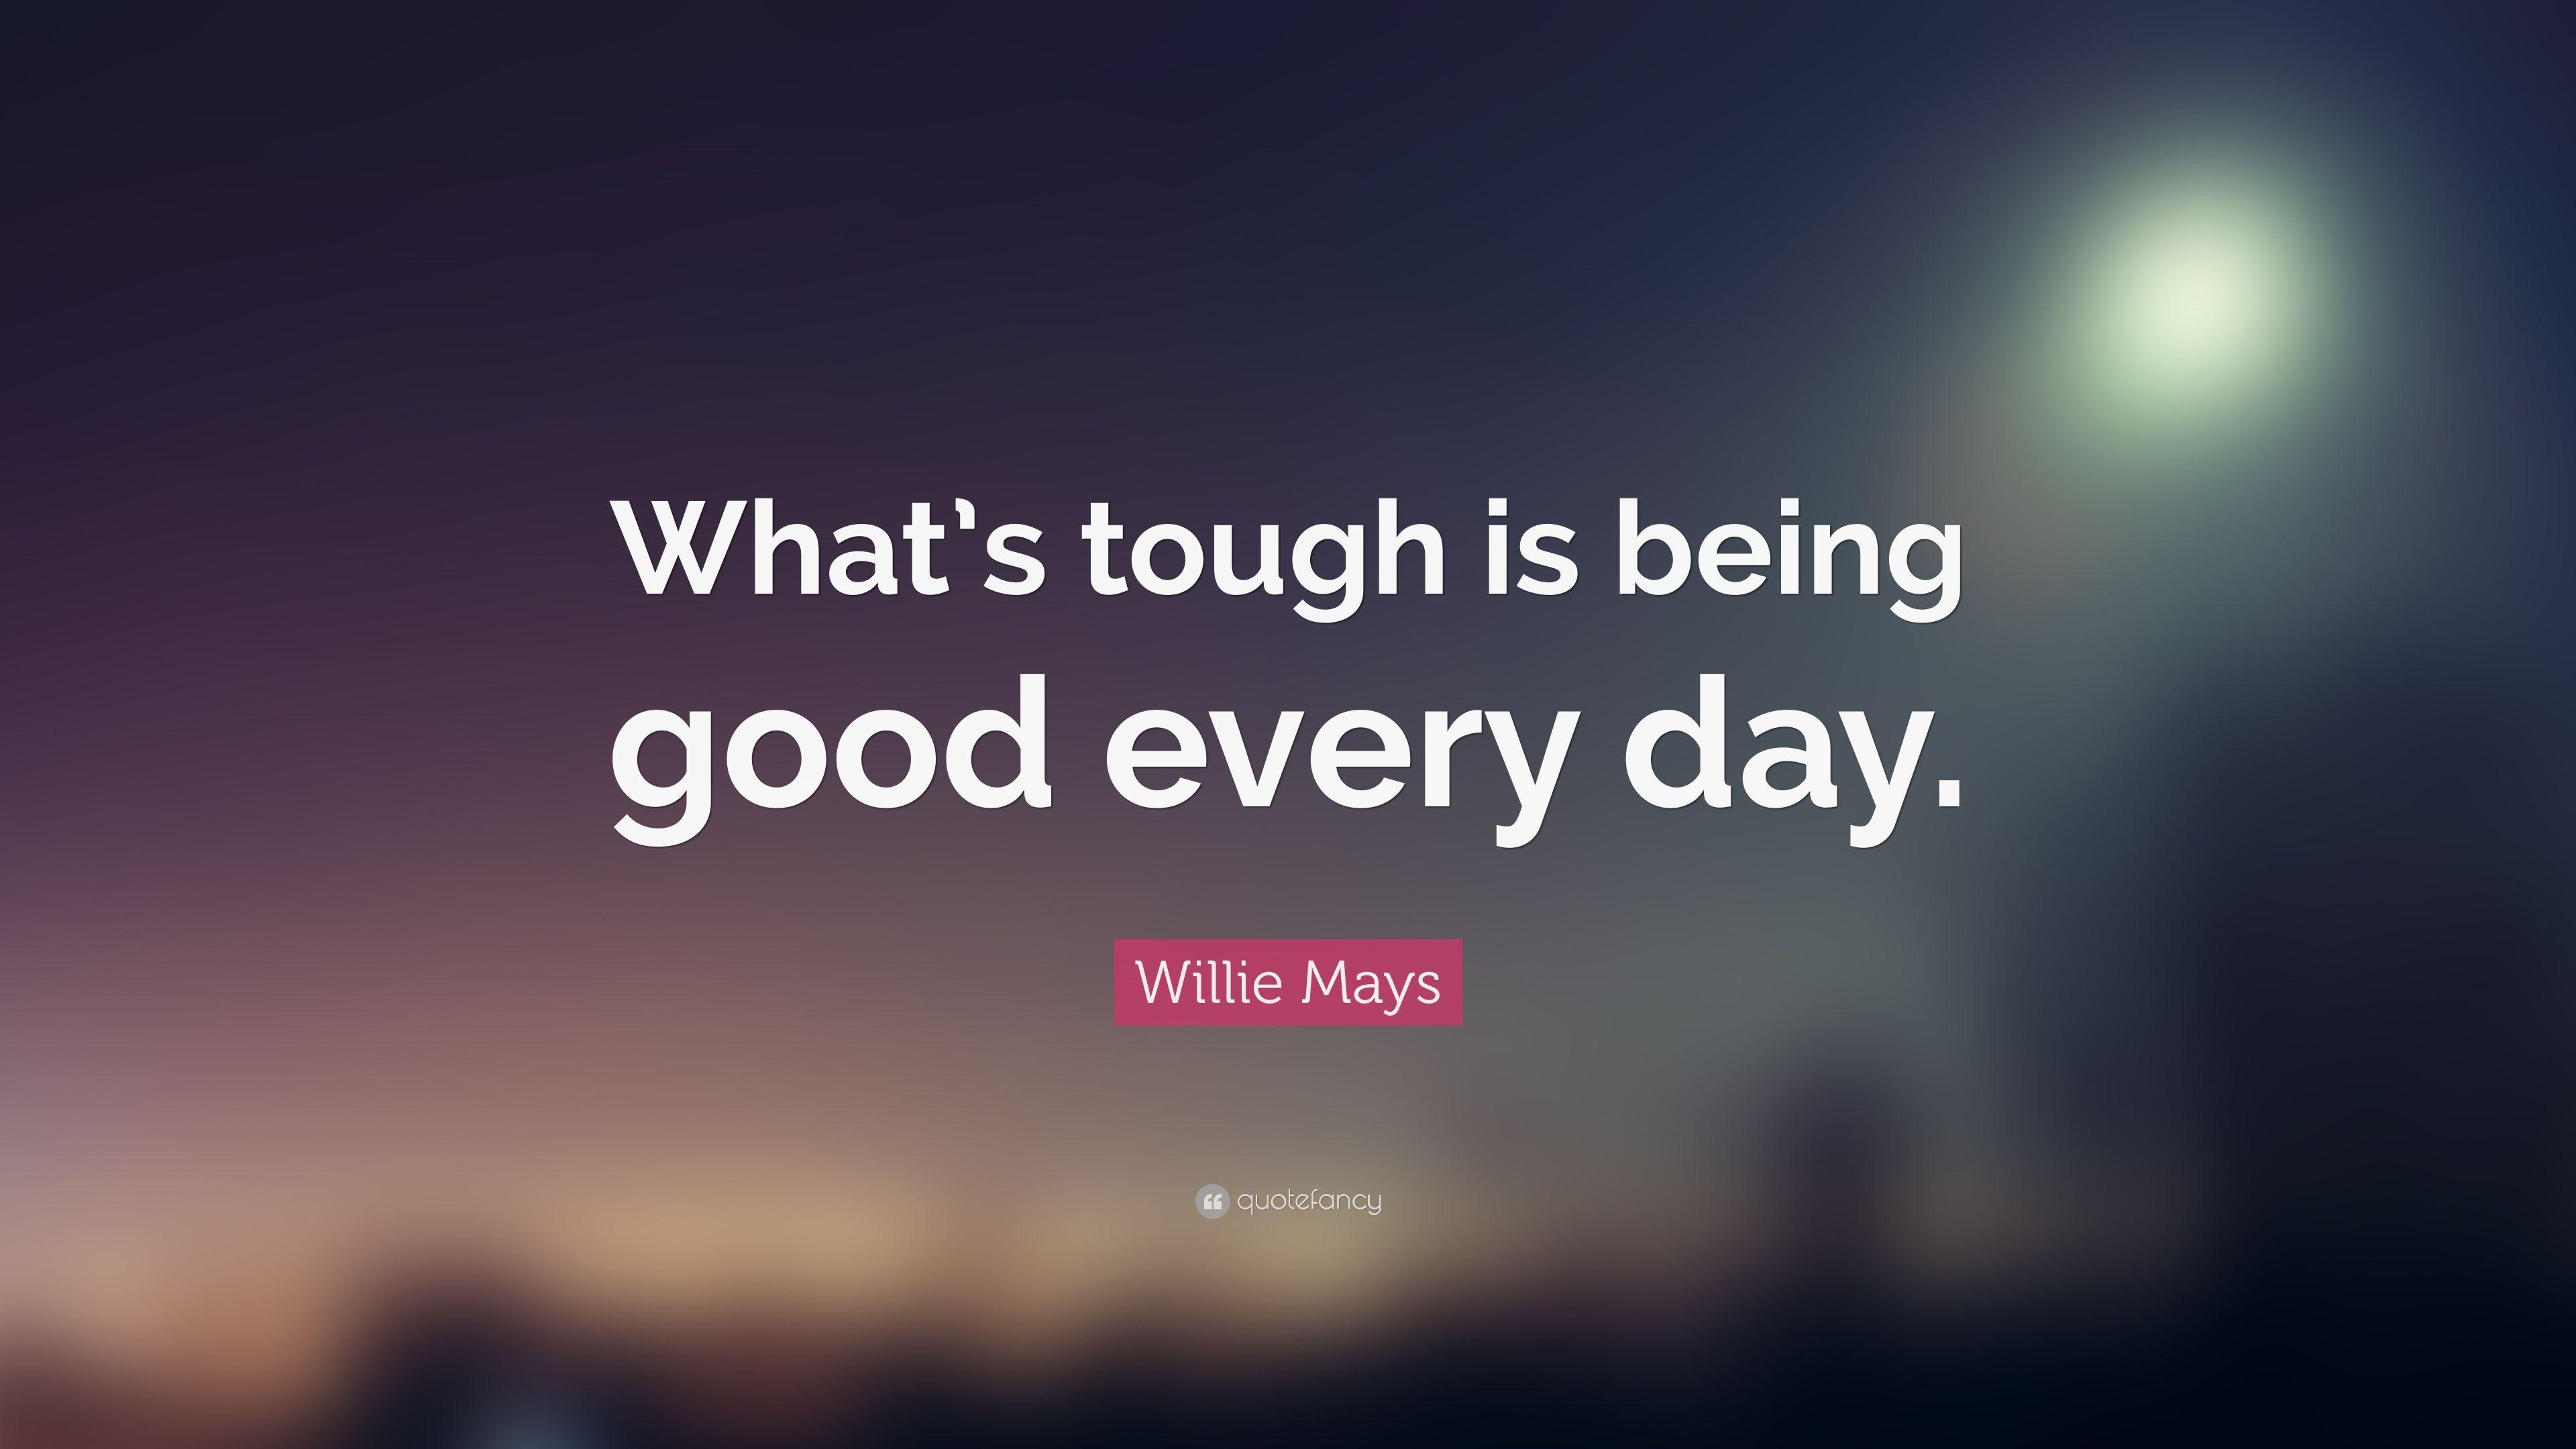 Willie Mays Quote: “What's tough is being good every day.” 7